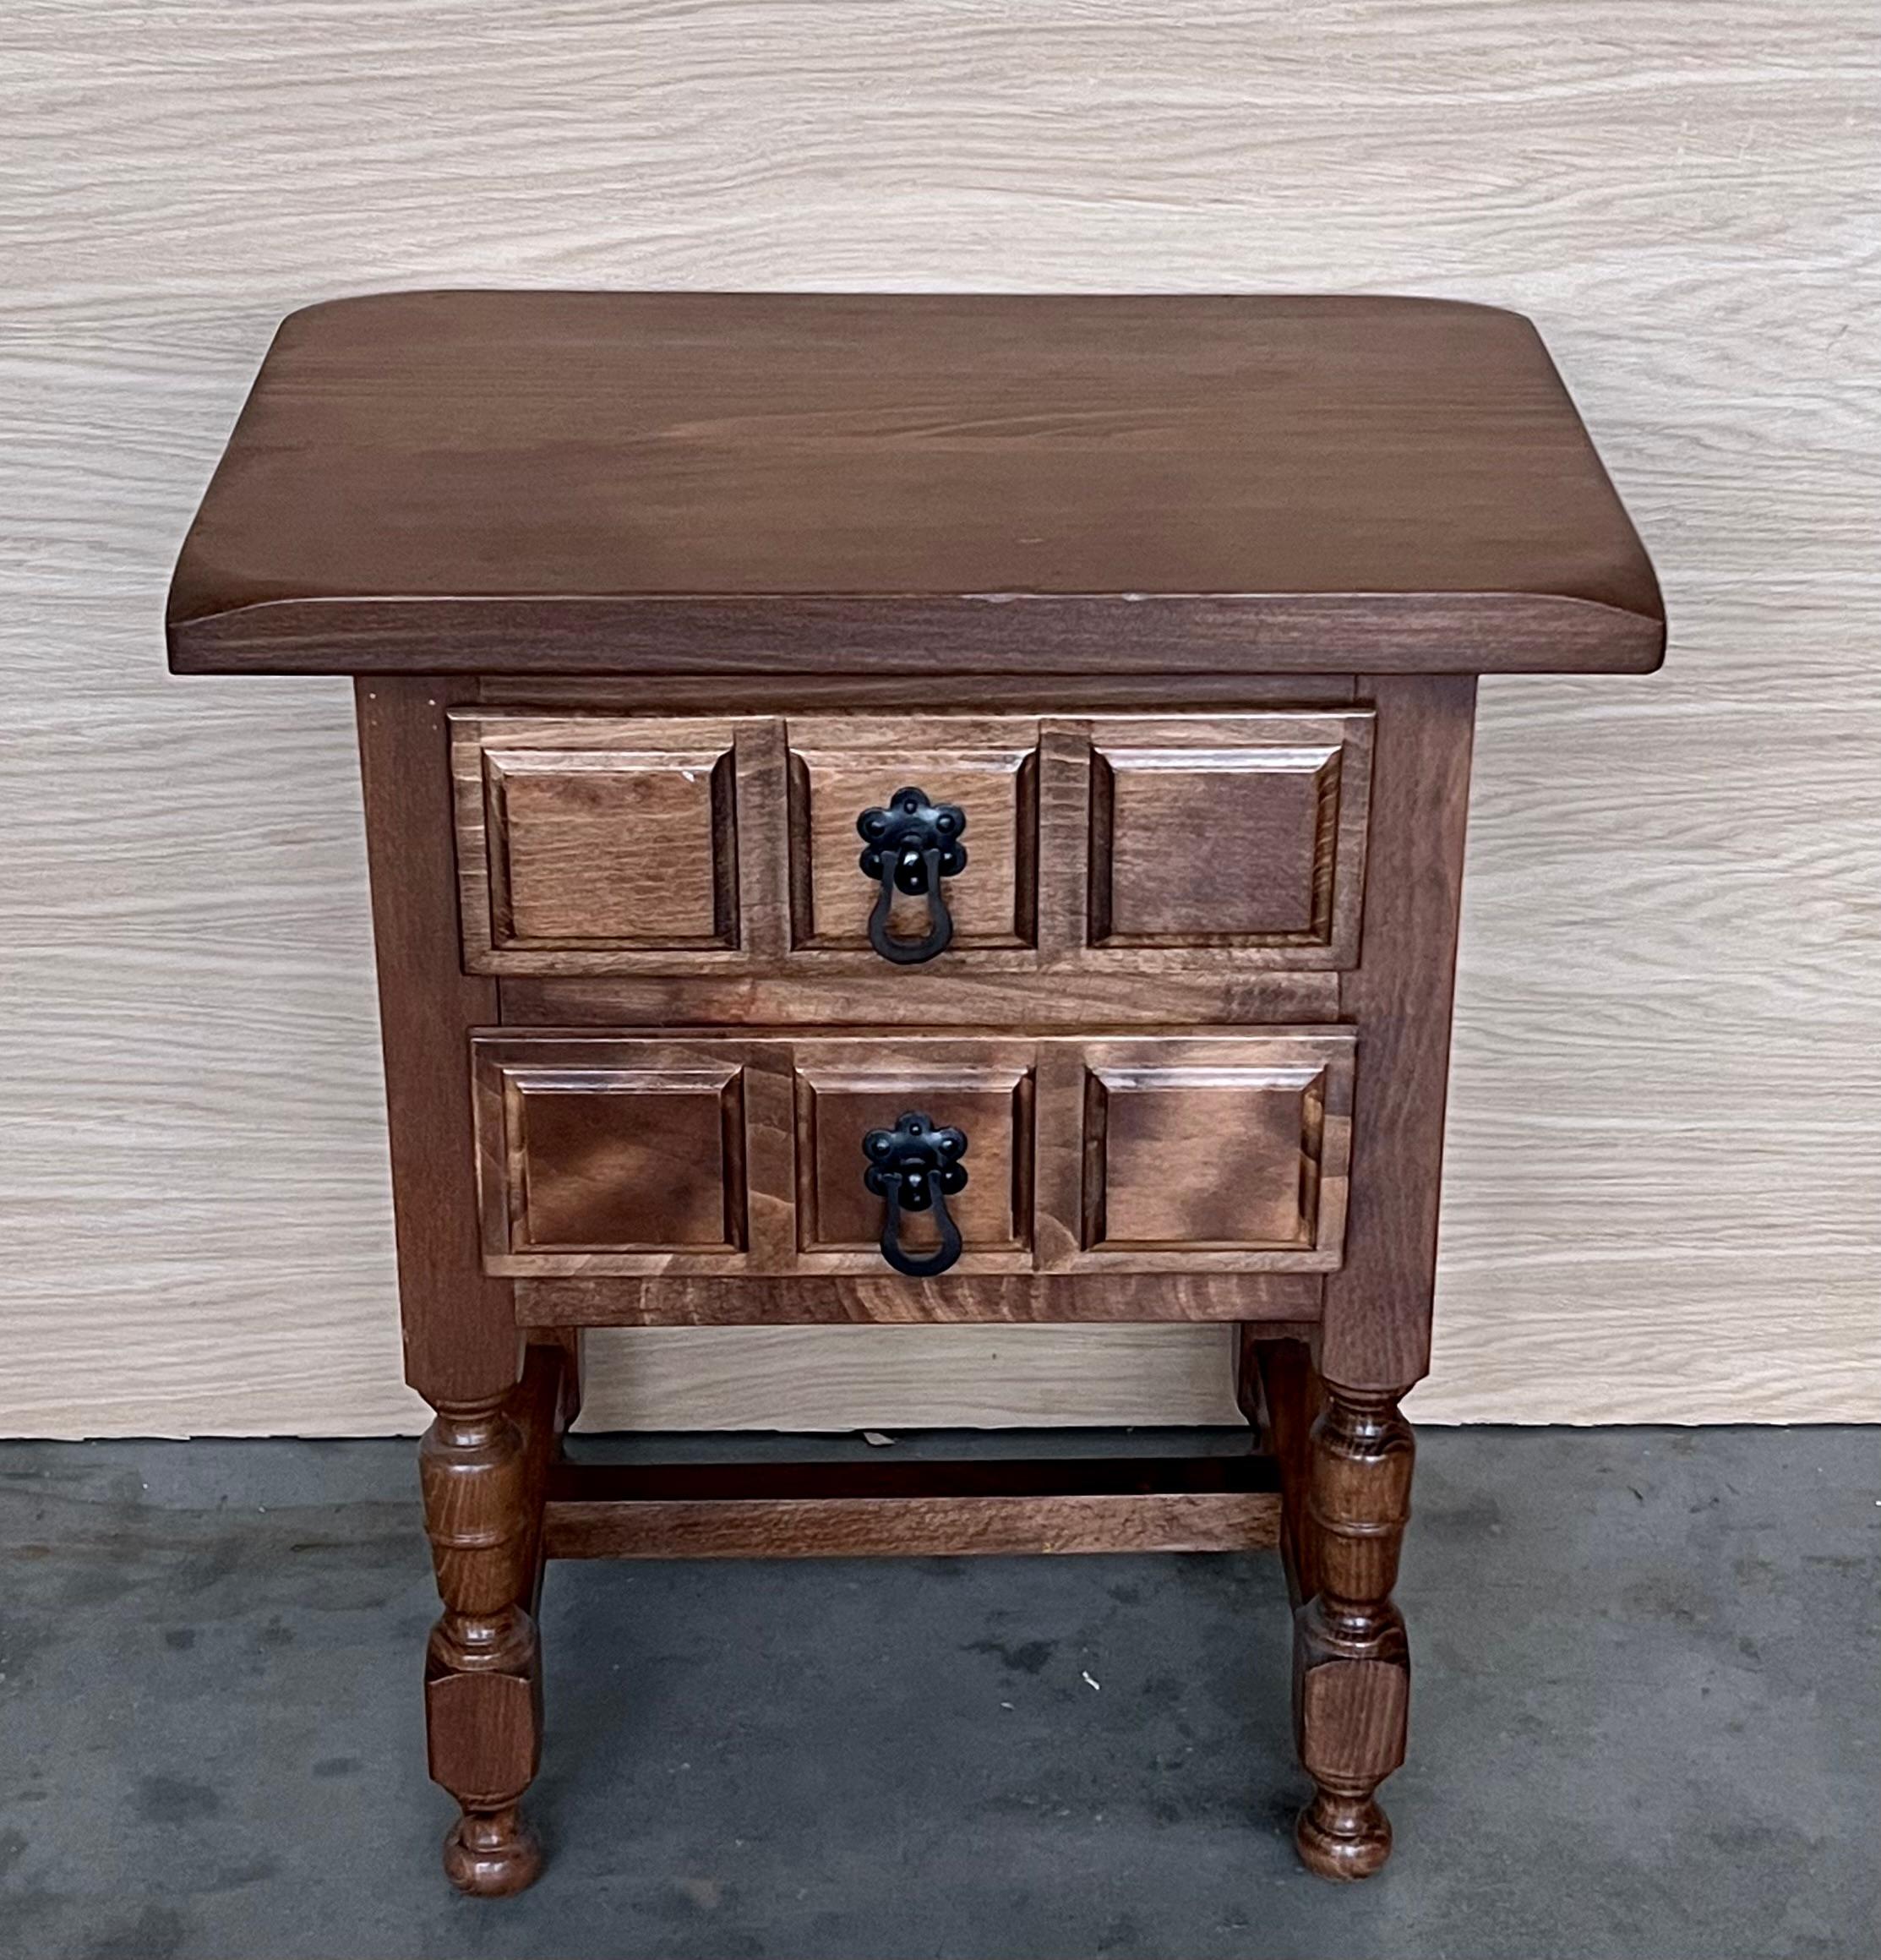 Spanish Colonial 20th Century Spanish Nightstands with Two Drawers and Iron Hardware